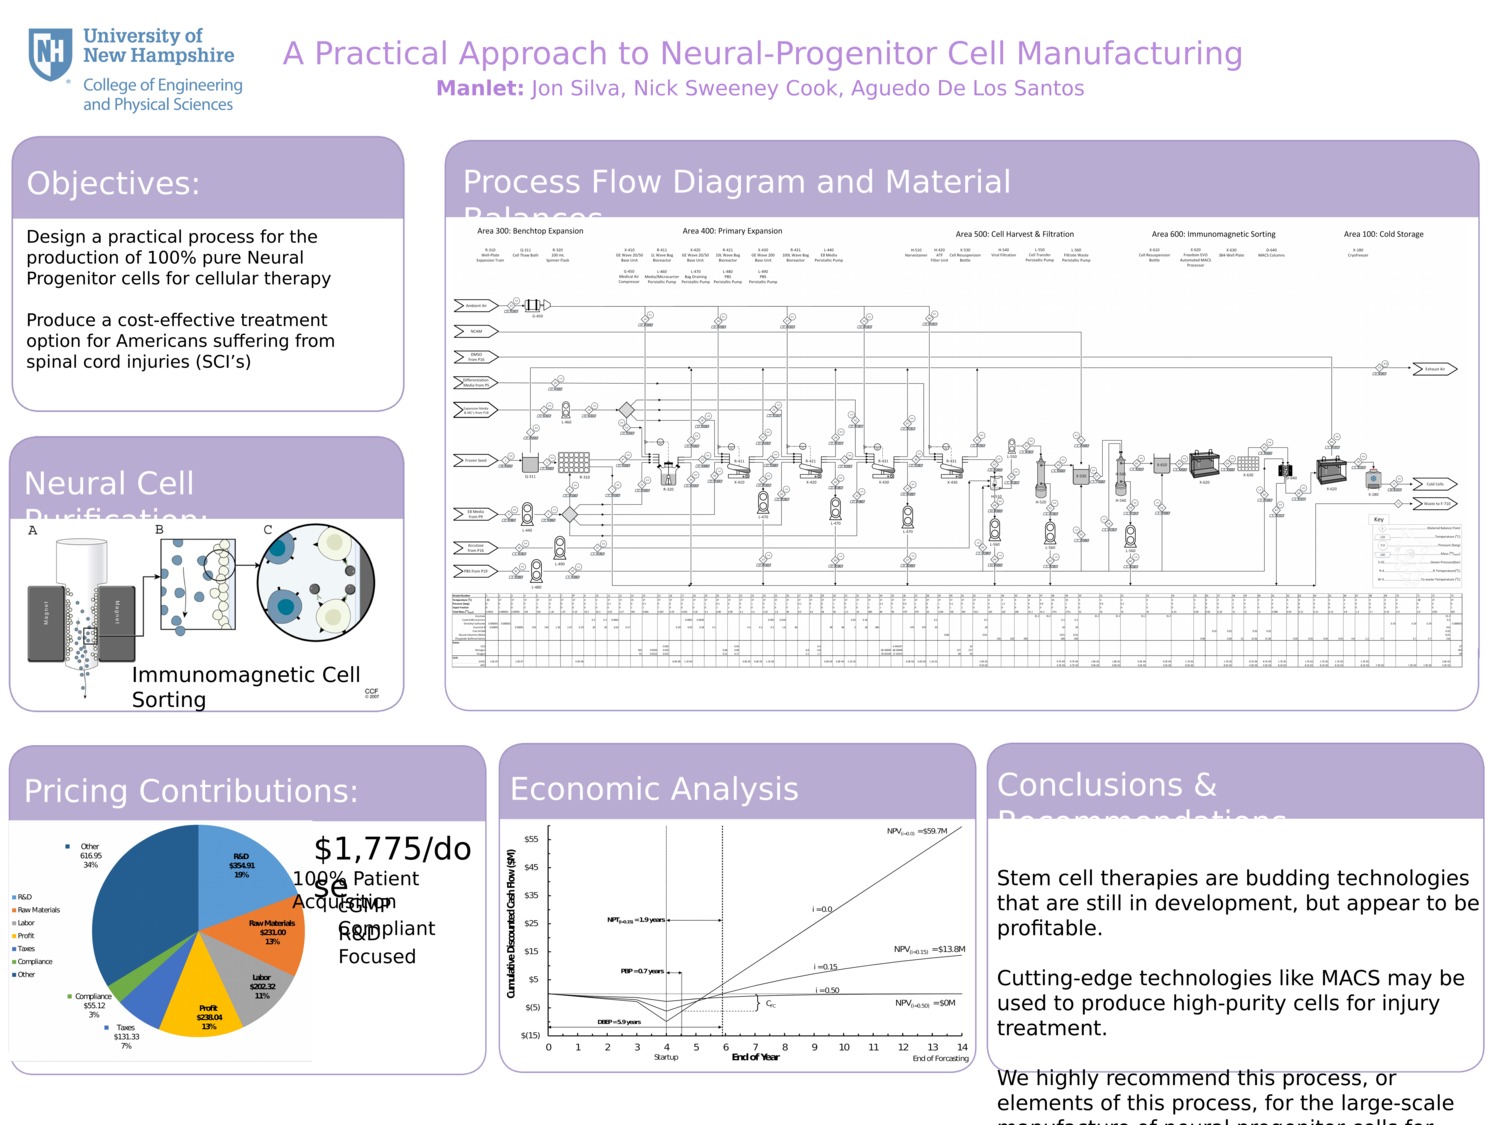 A Practical Approach To Neural-Progenitor Cell Manufacturing by nmh57